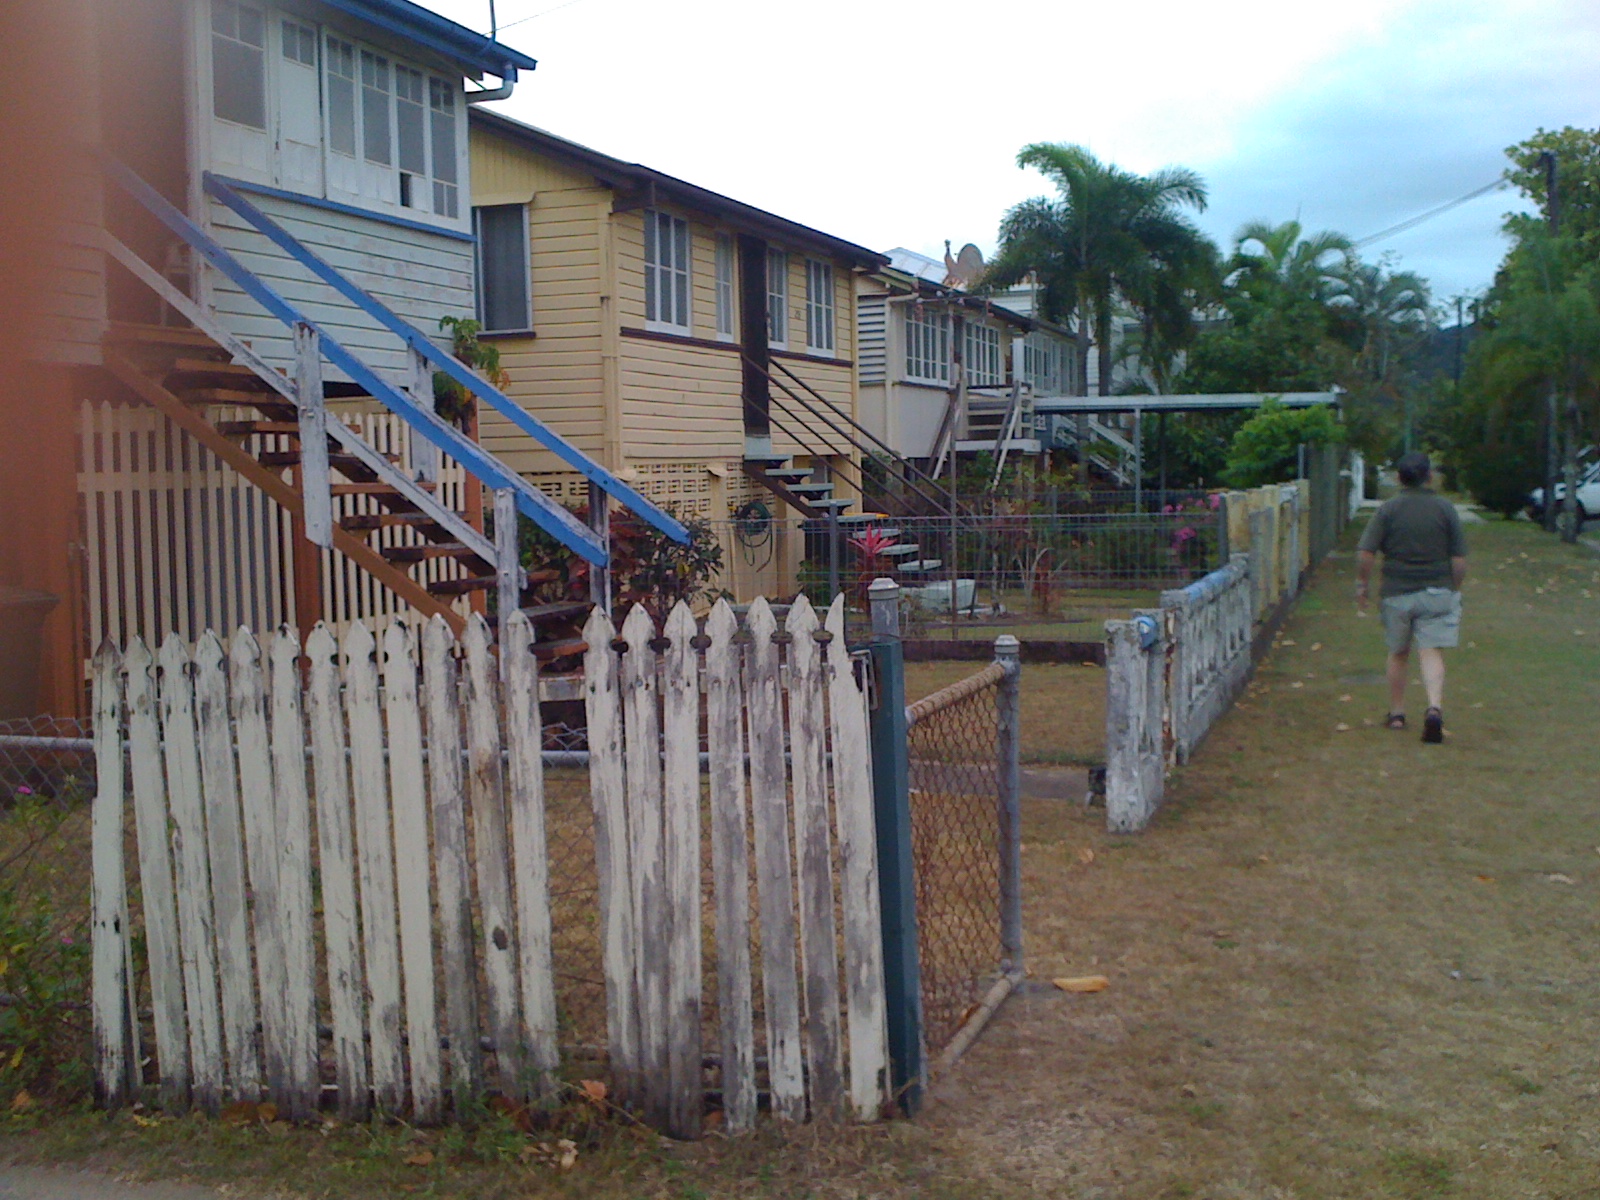 Architecture in Cairns, far north Queensland, and surrounding towns